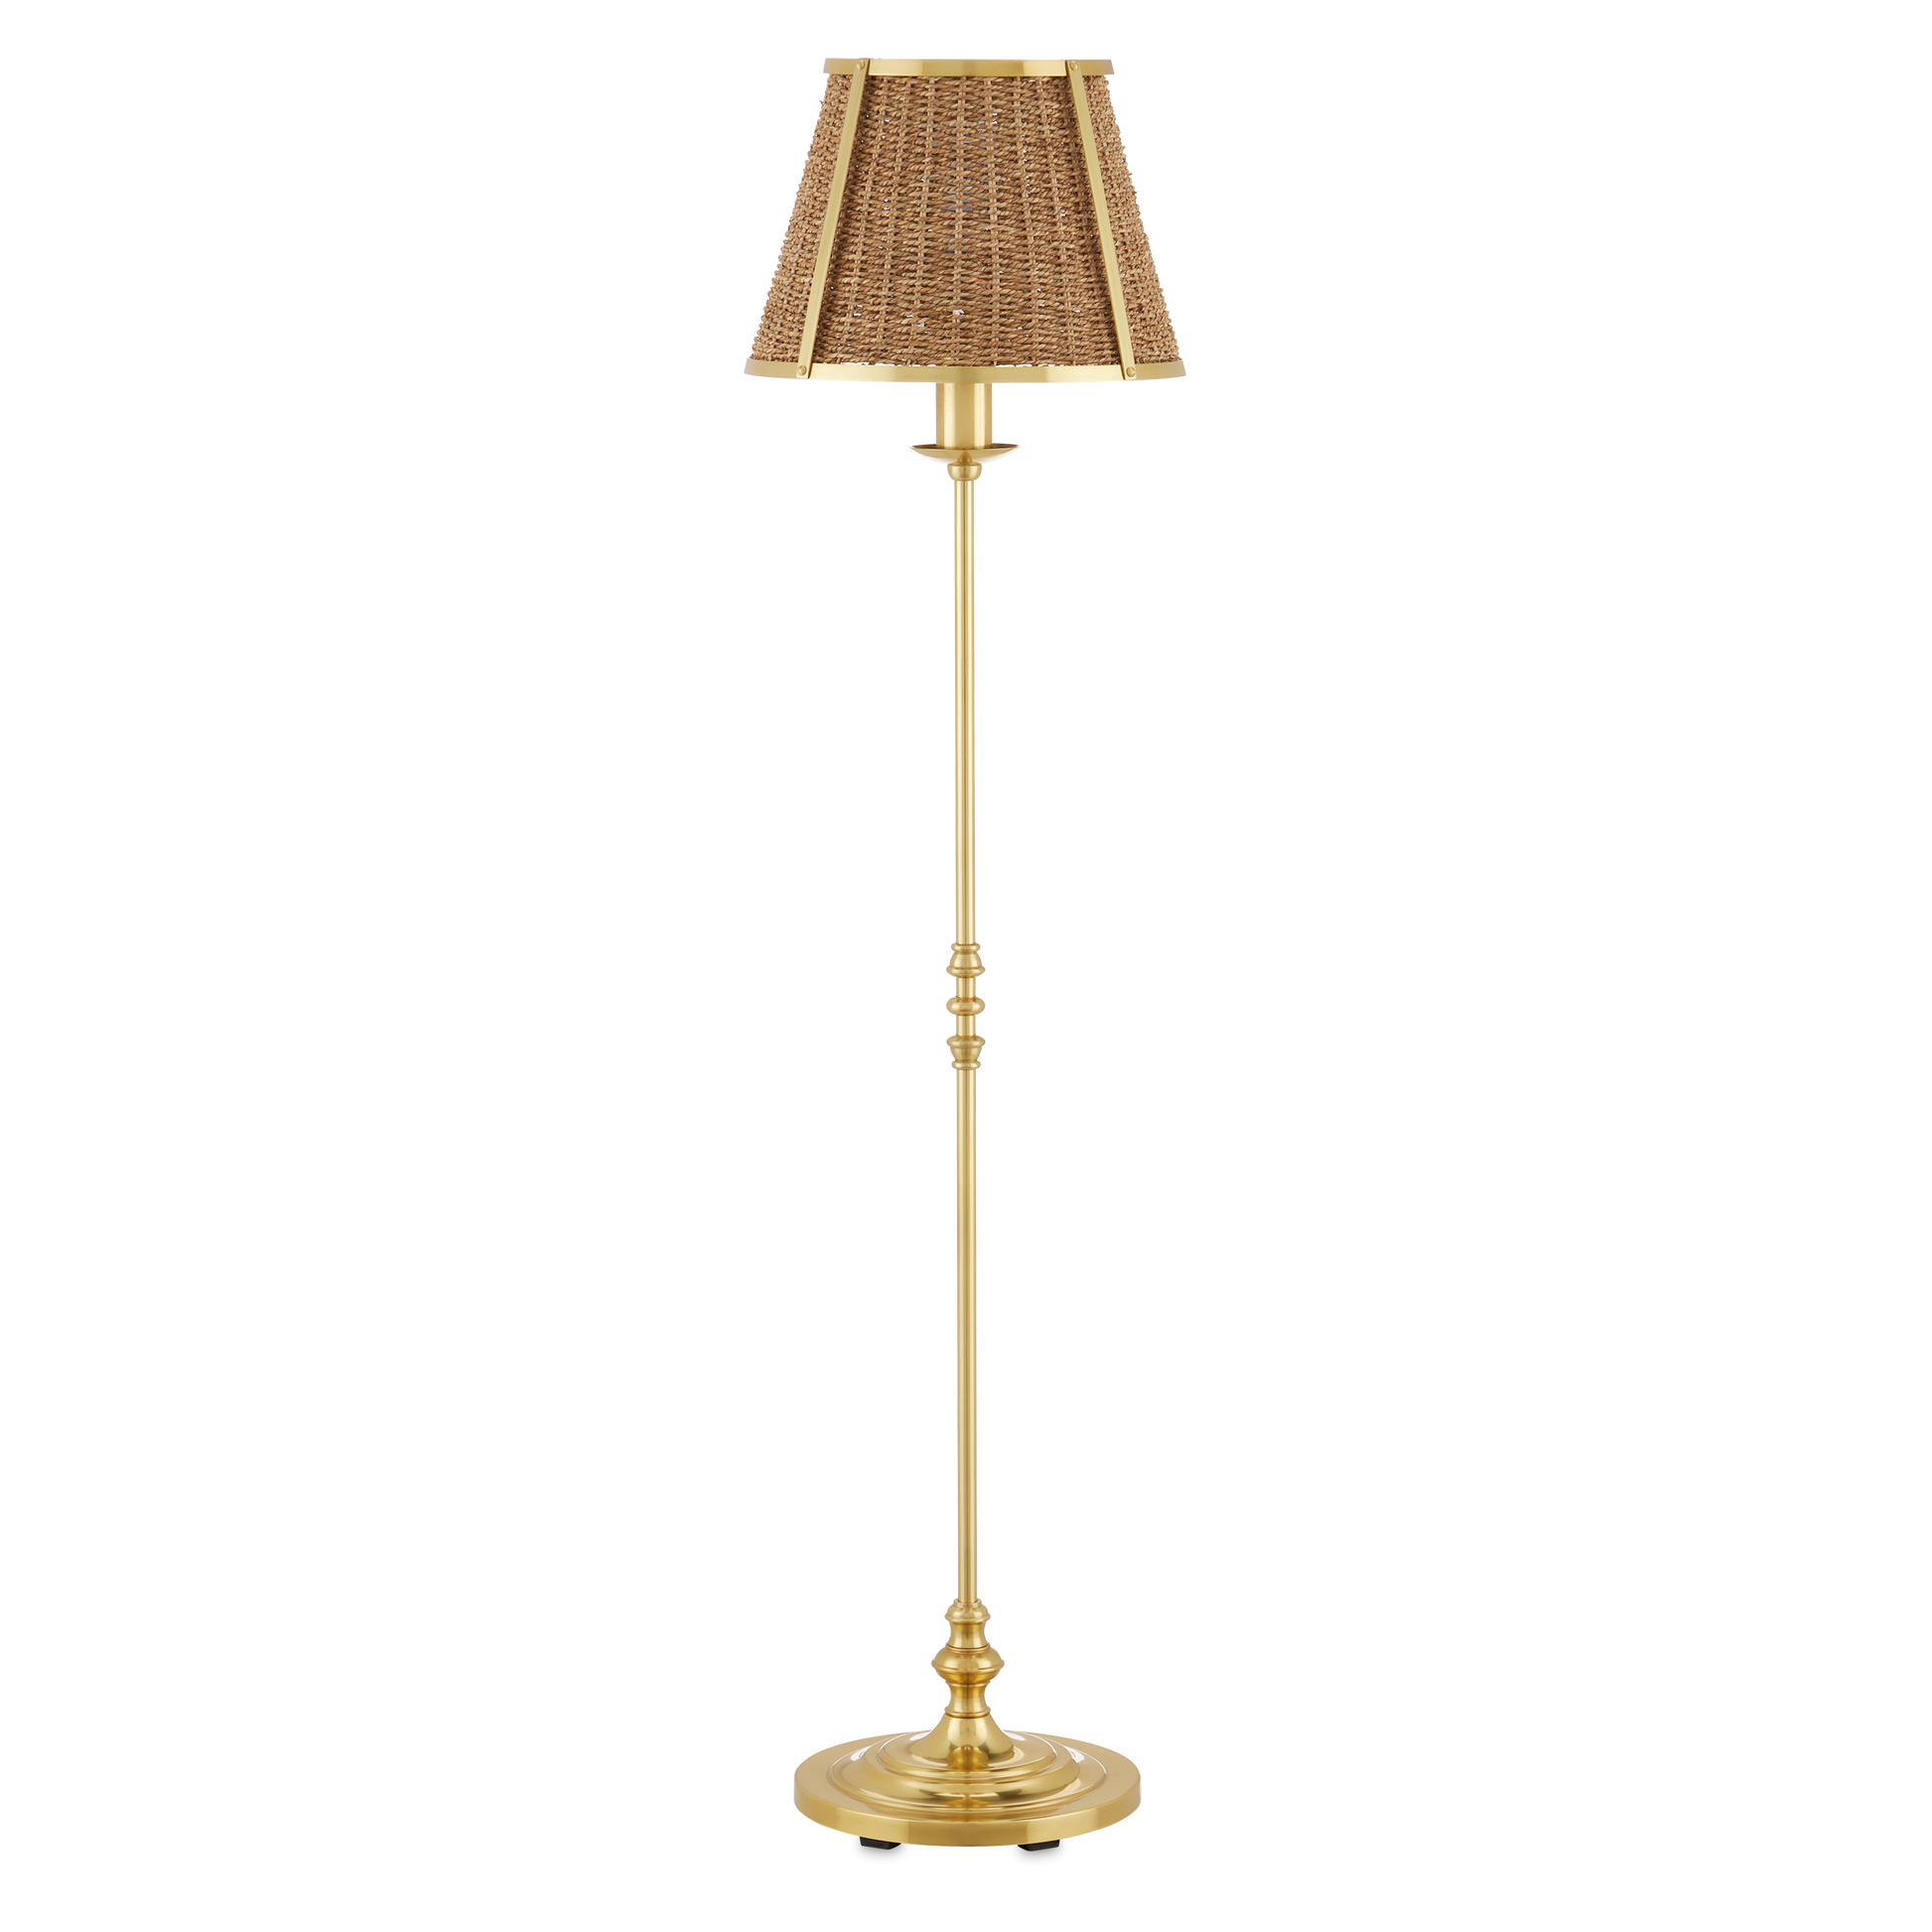 The Deauville Floor Lamp by Currey & Company | Luxury Floor Lamps | Willow & Albert Home